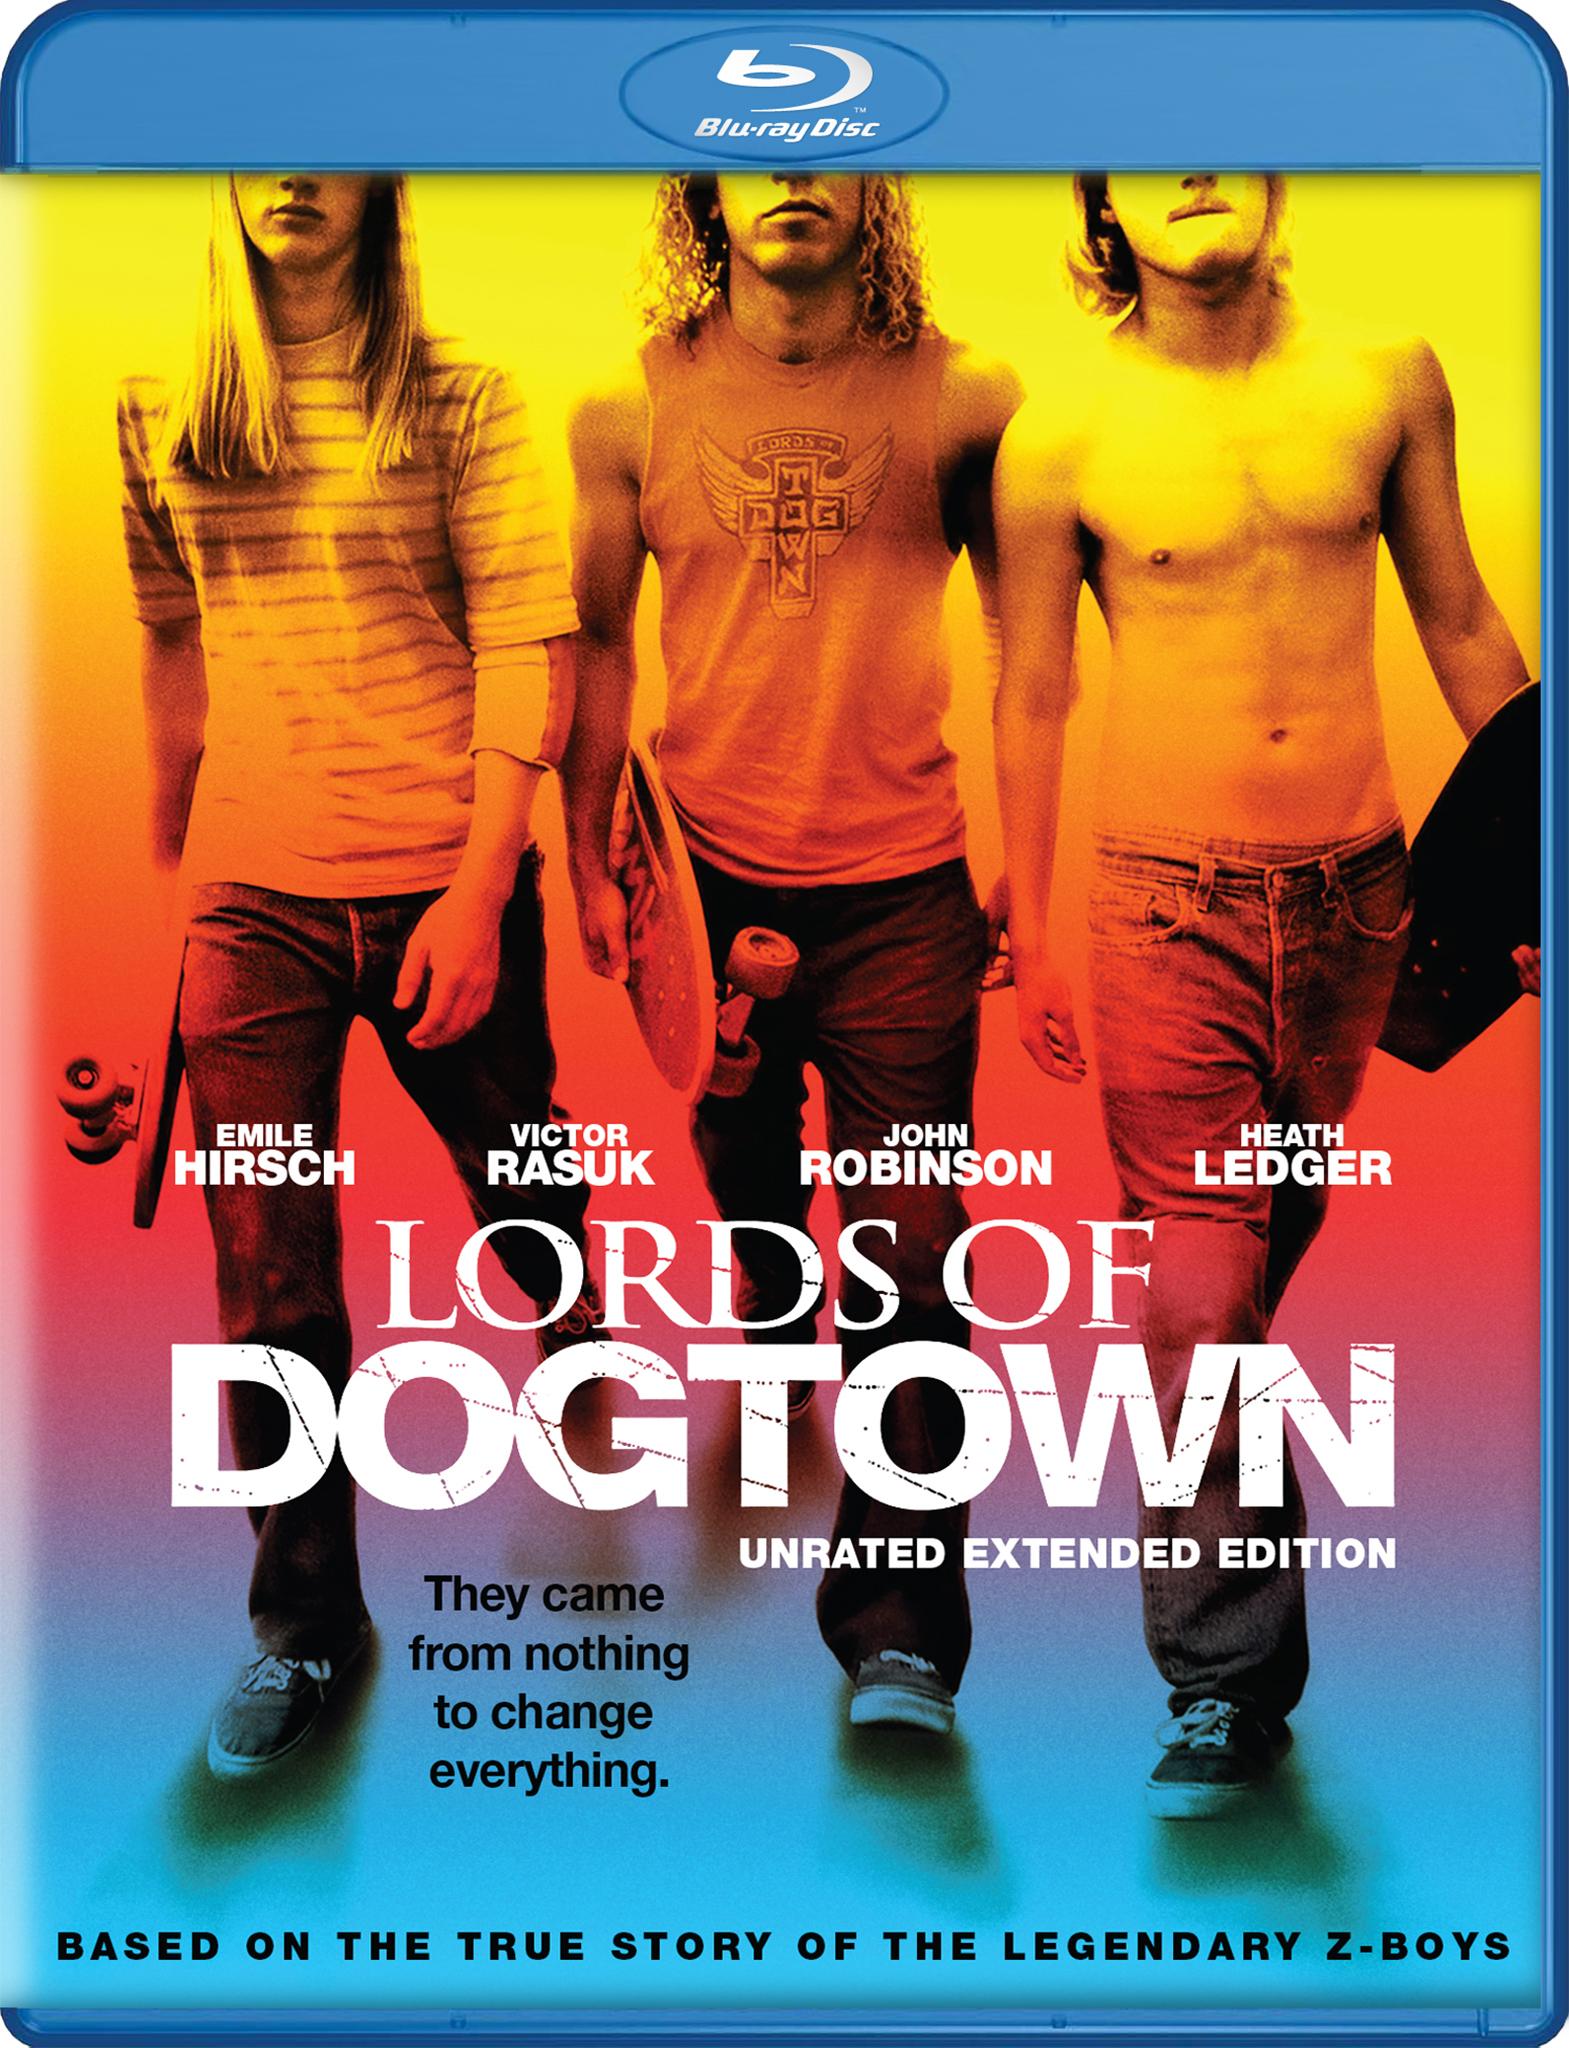 Radiator Heaven: Dogtown and Z-Boys / Lords of Dogtown